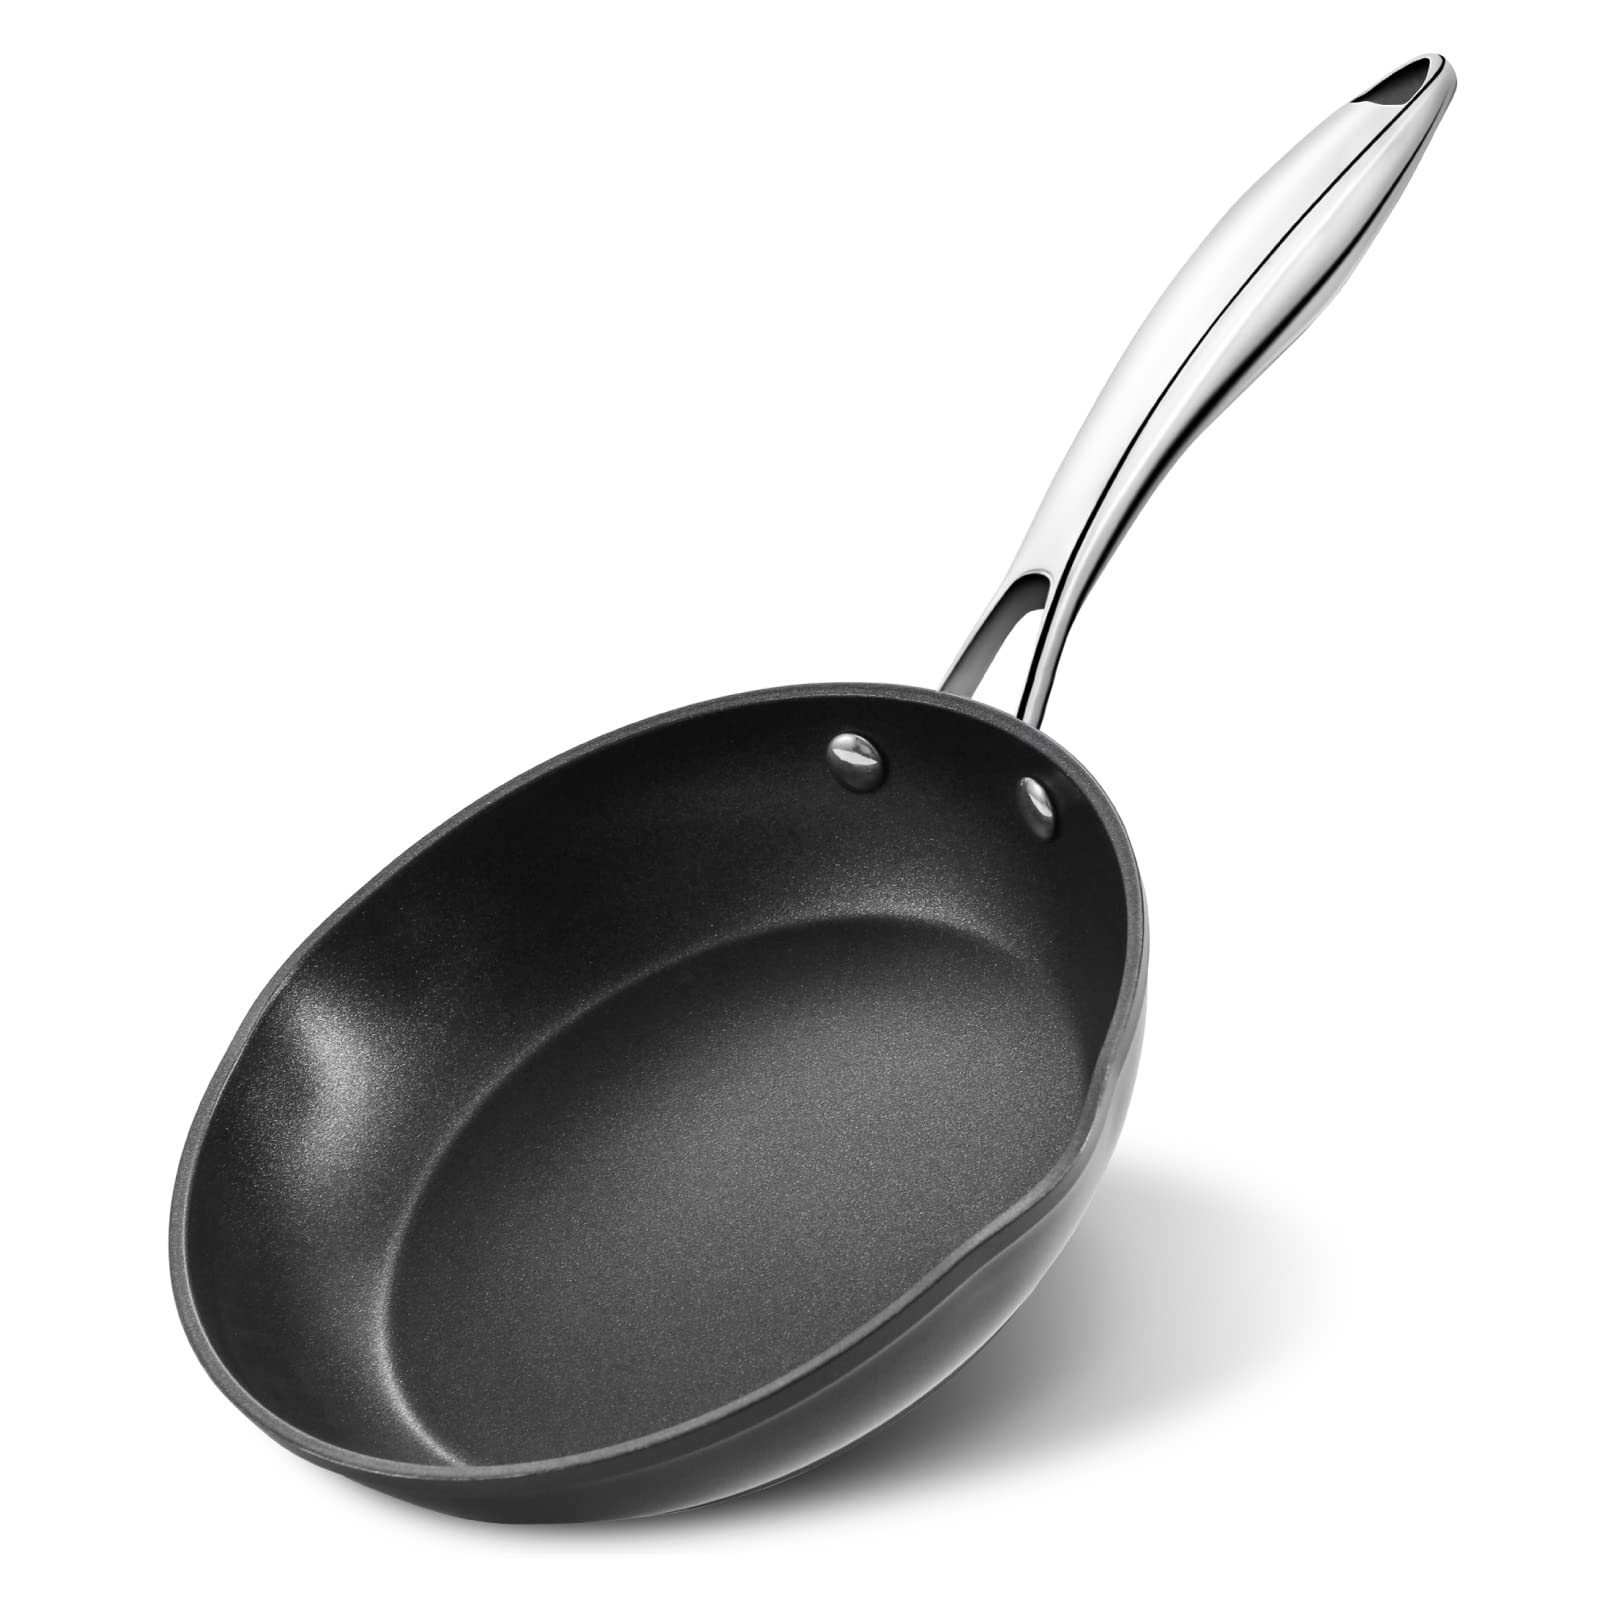 CHEFLY Nonstick Frying Pan 8 Inch